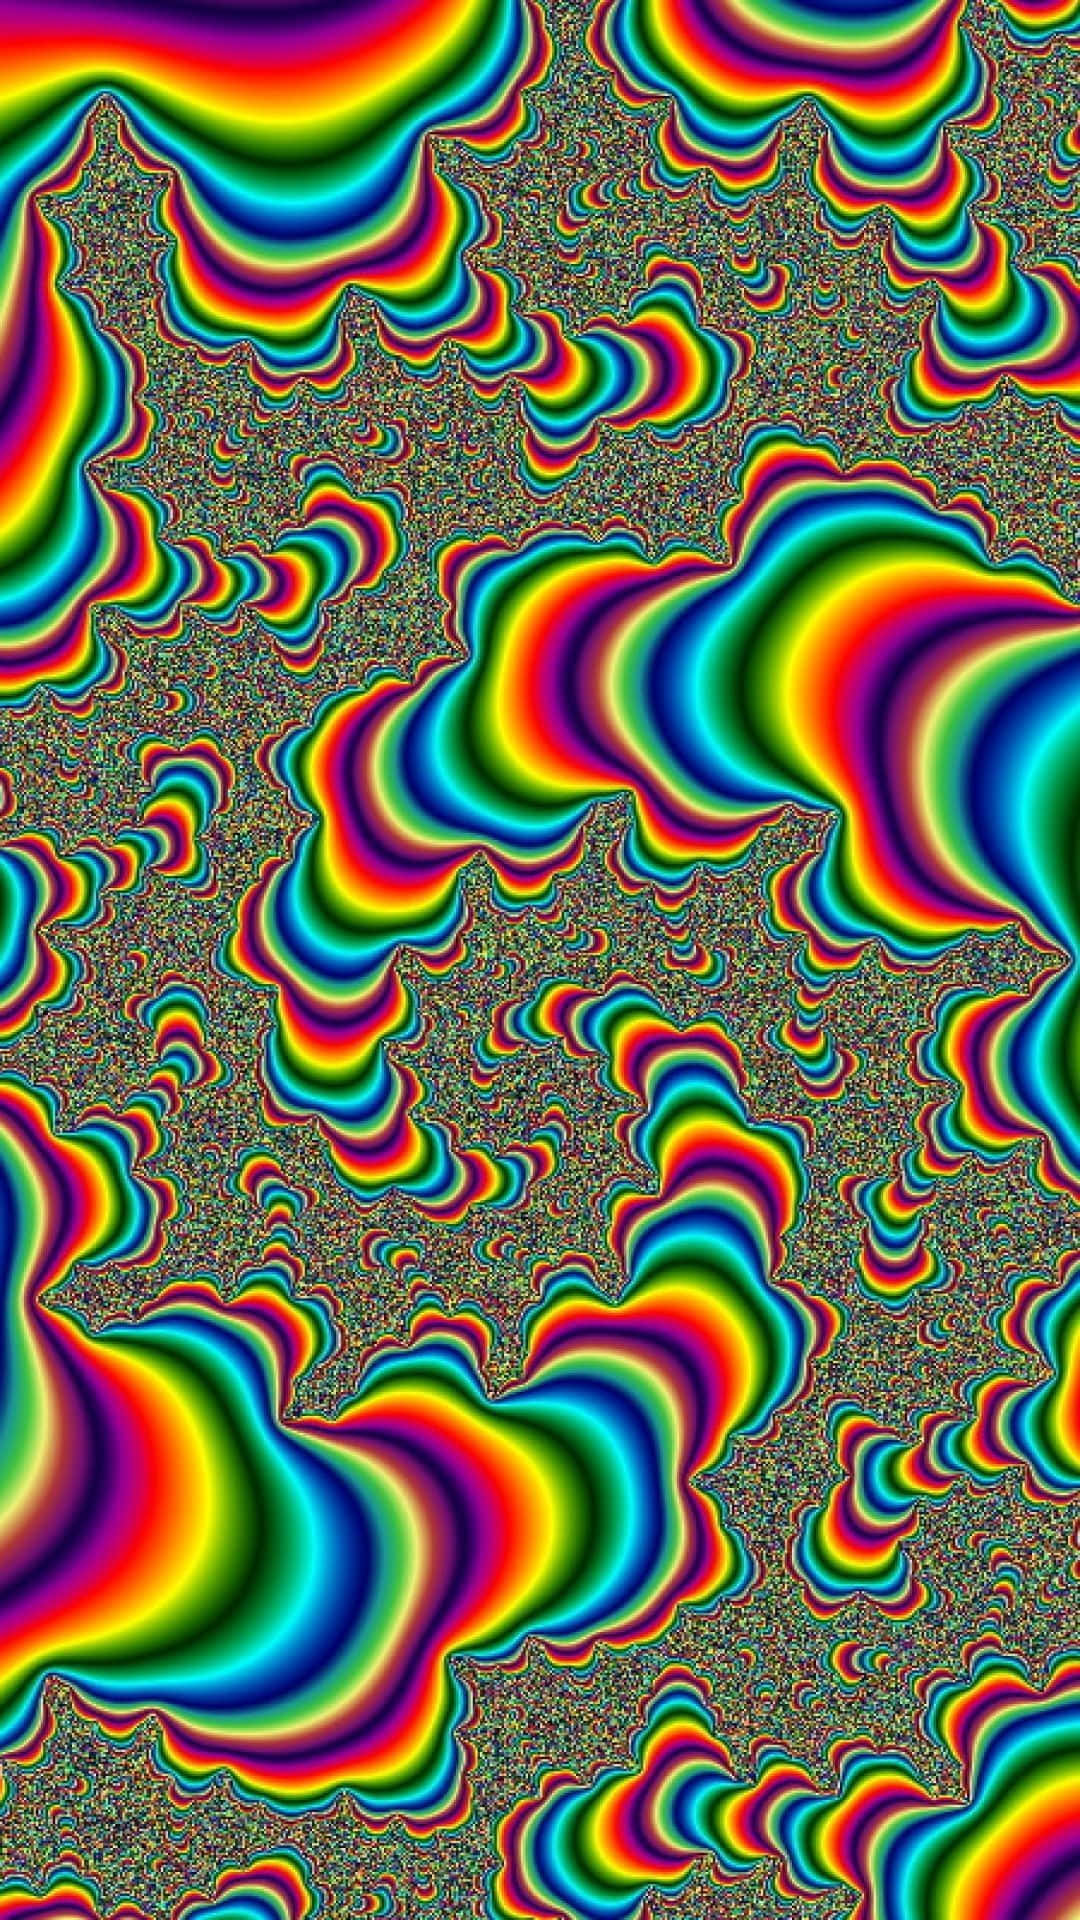 A Colorful Psychedelic Image With Rainbow Waves